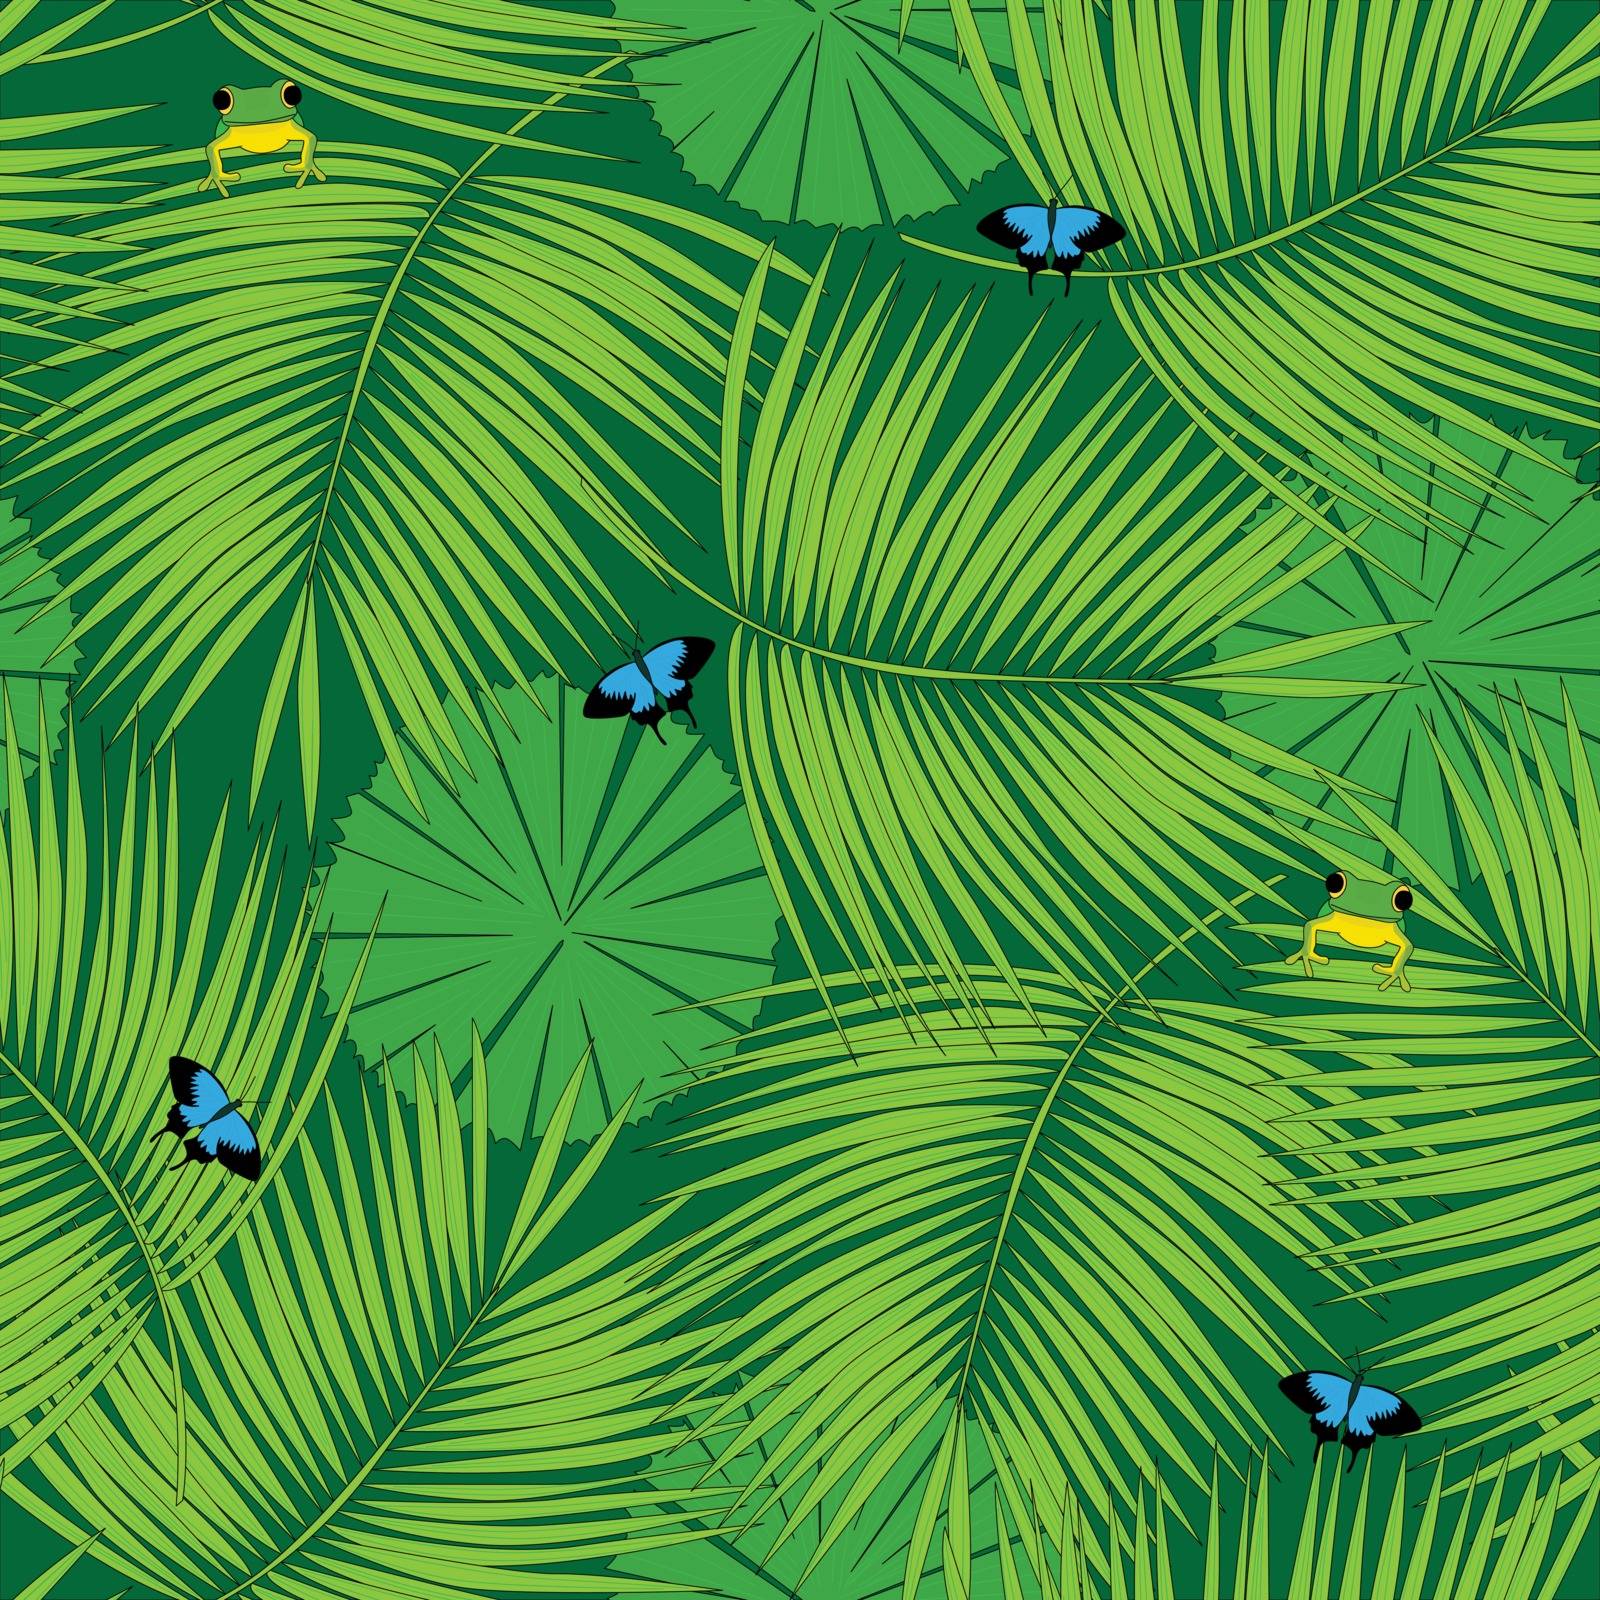 Rain forest pattern by nahhan